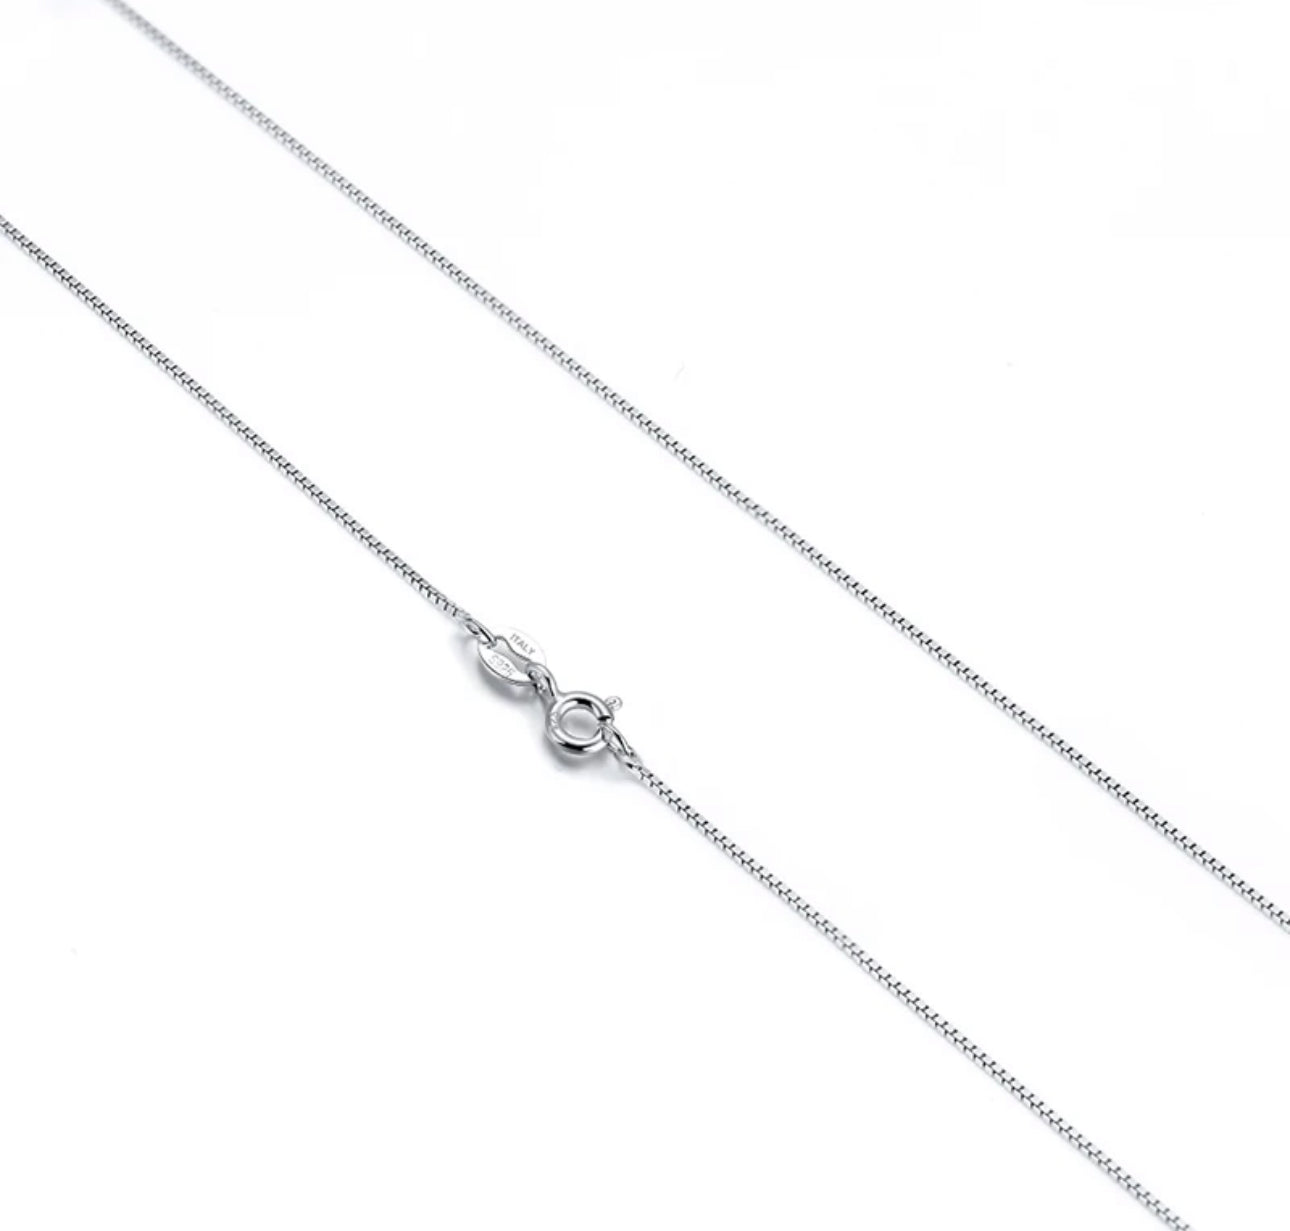 Thin Sterling Silver Chains